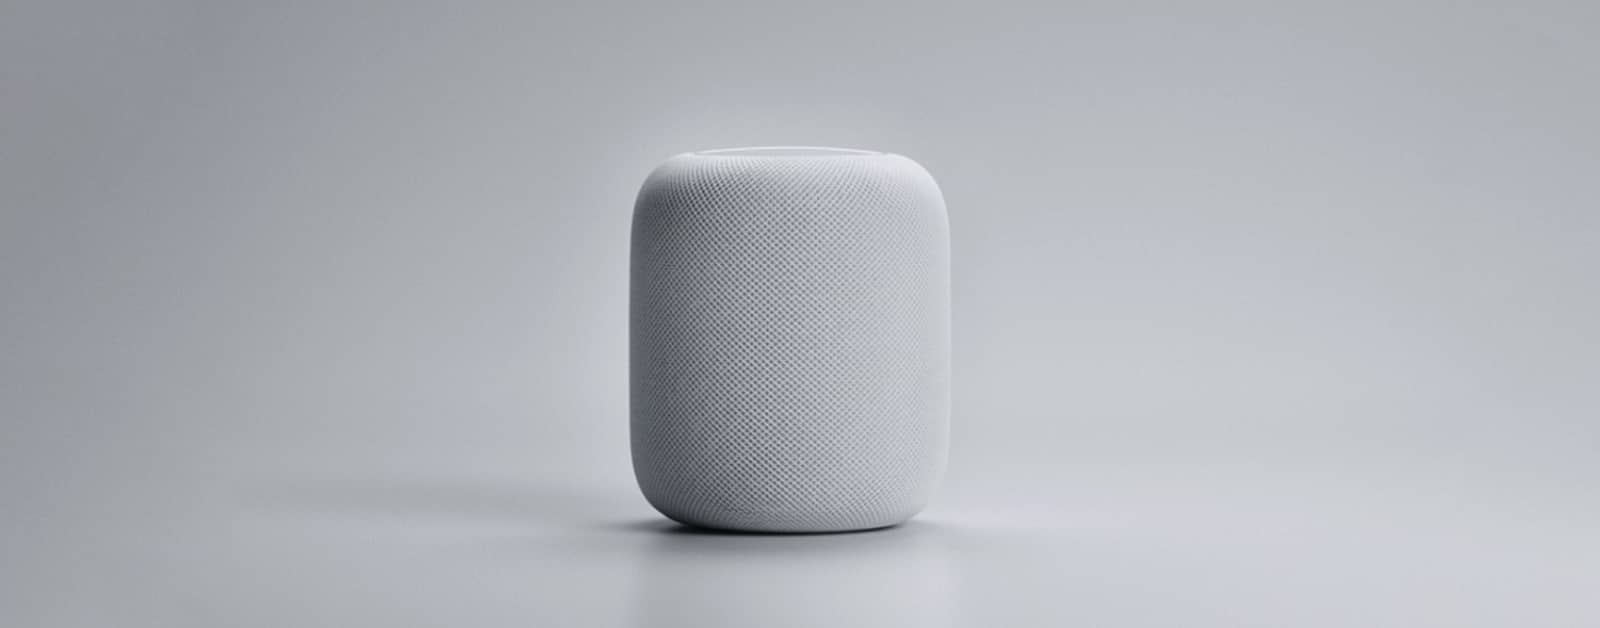 Is Augmented Reality the Future of HomePod?